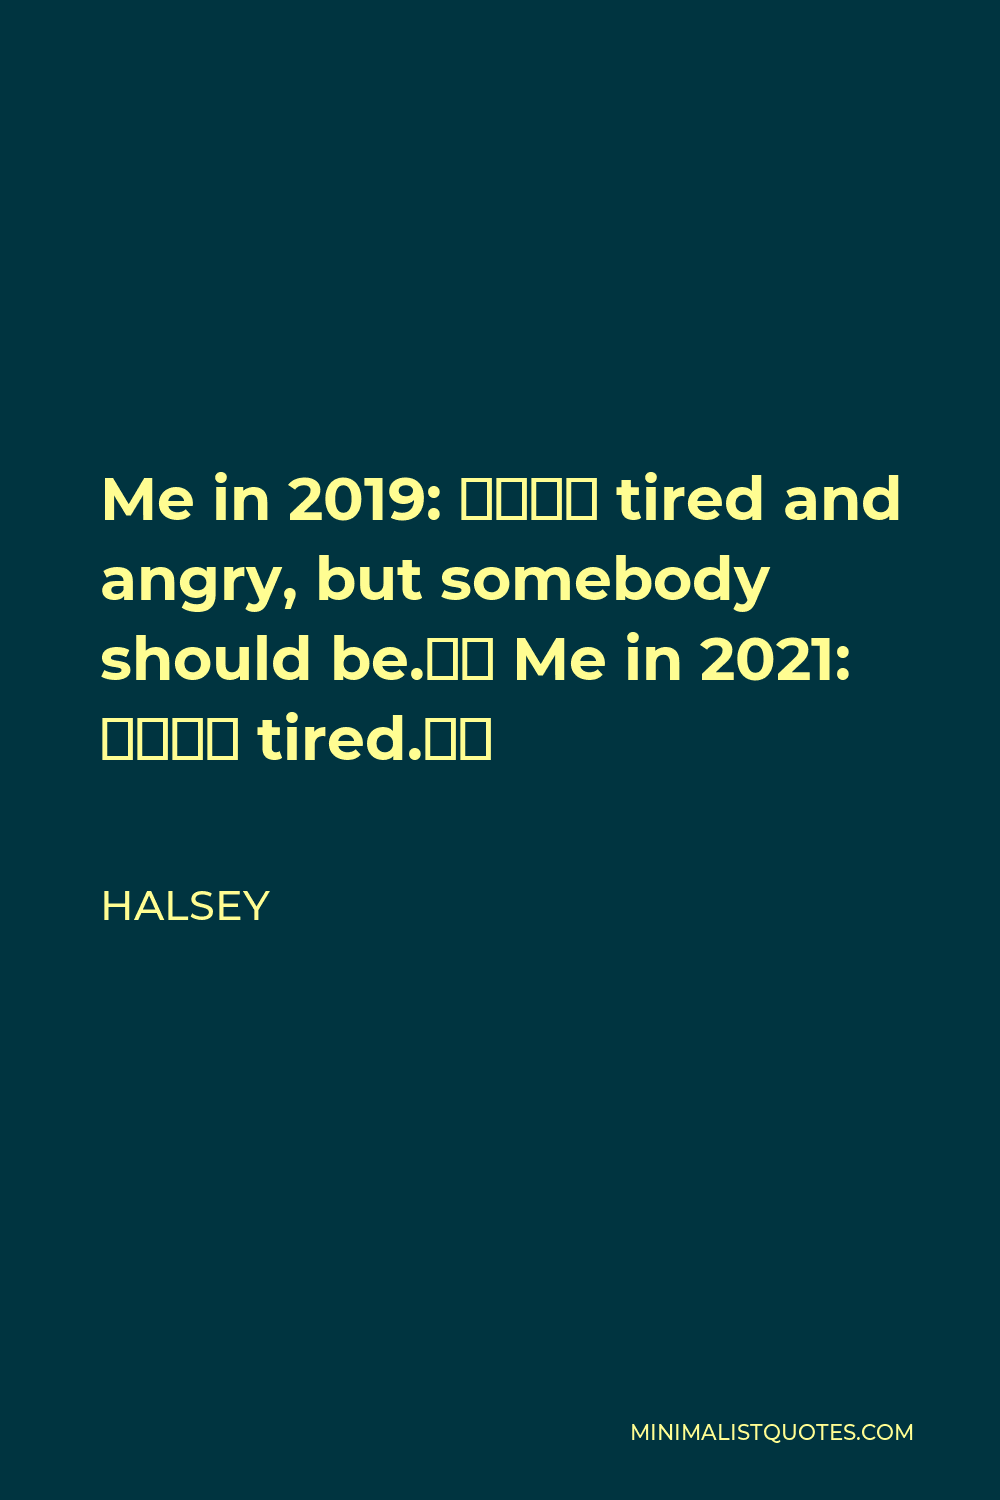 Halsey Quote - Me in 2019: “I’m tired and angry, but somebody should be.” Me in 2021: “I’m tired.”